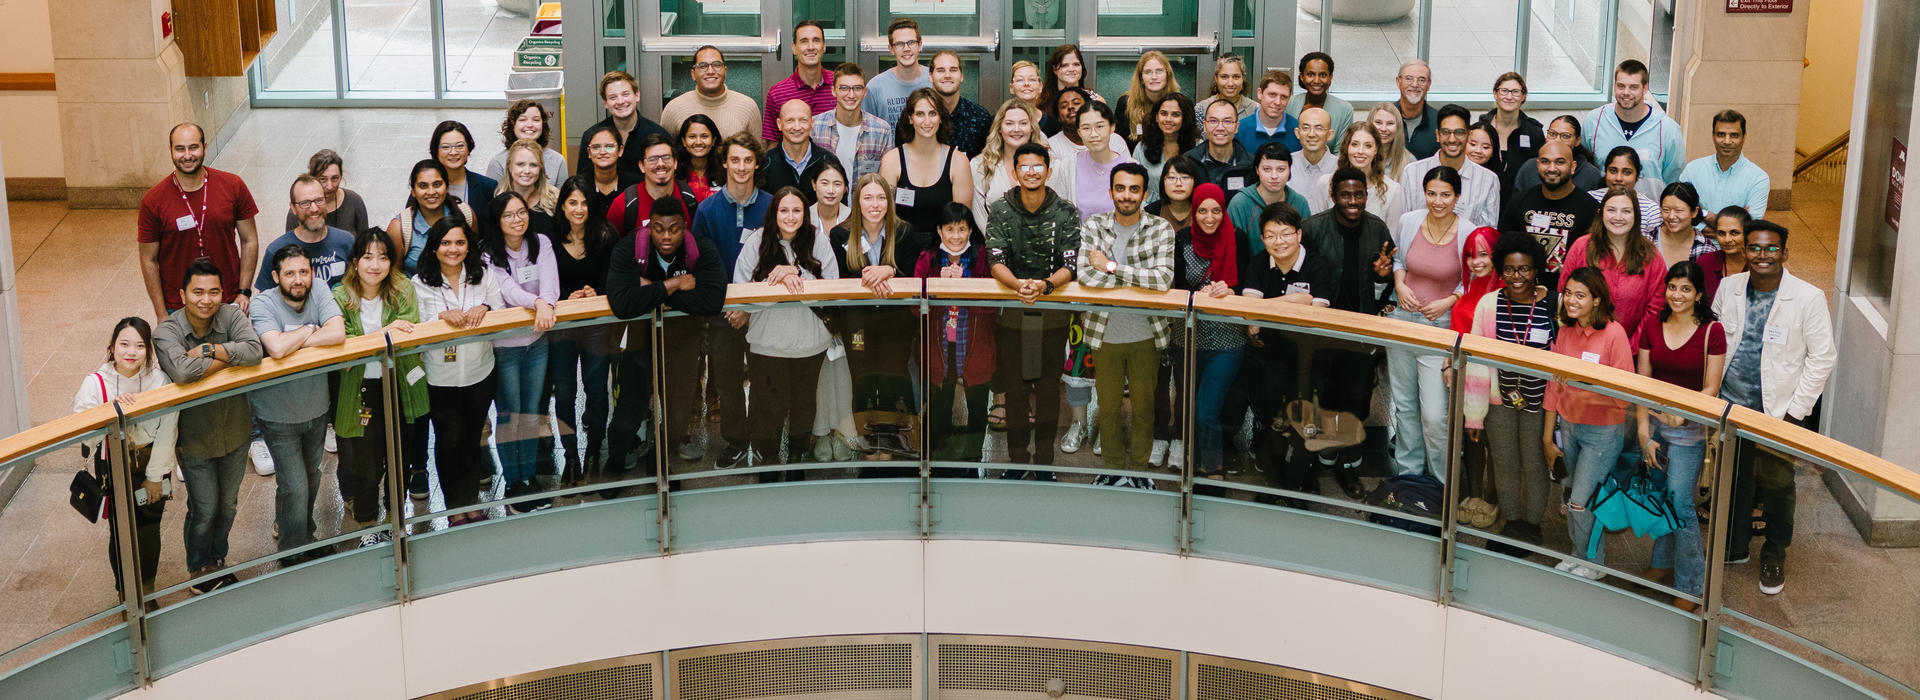 group portrait of the graduate program in pharmacology learning community